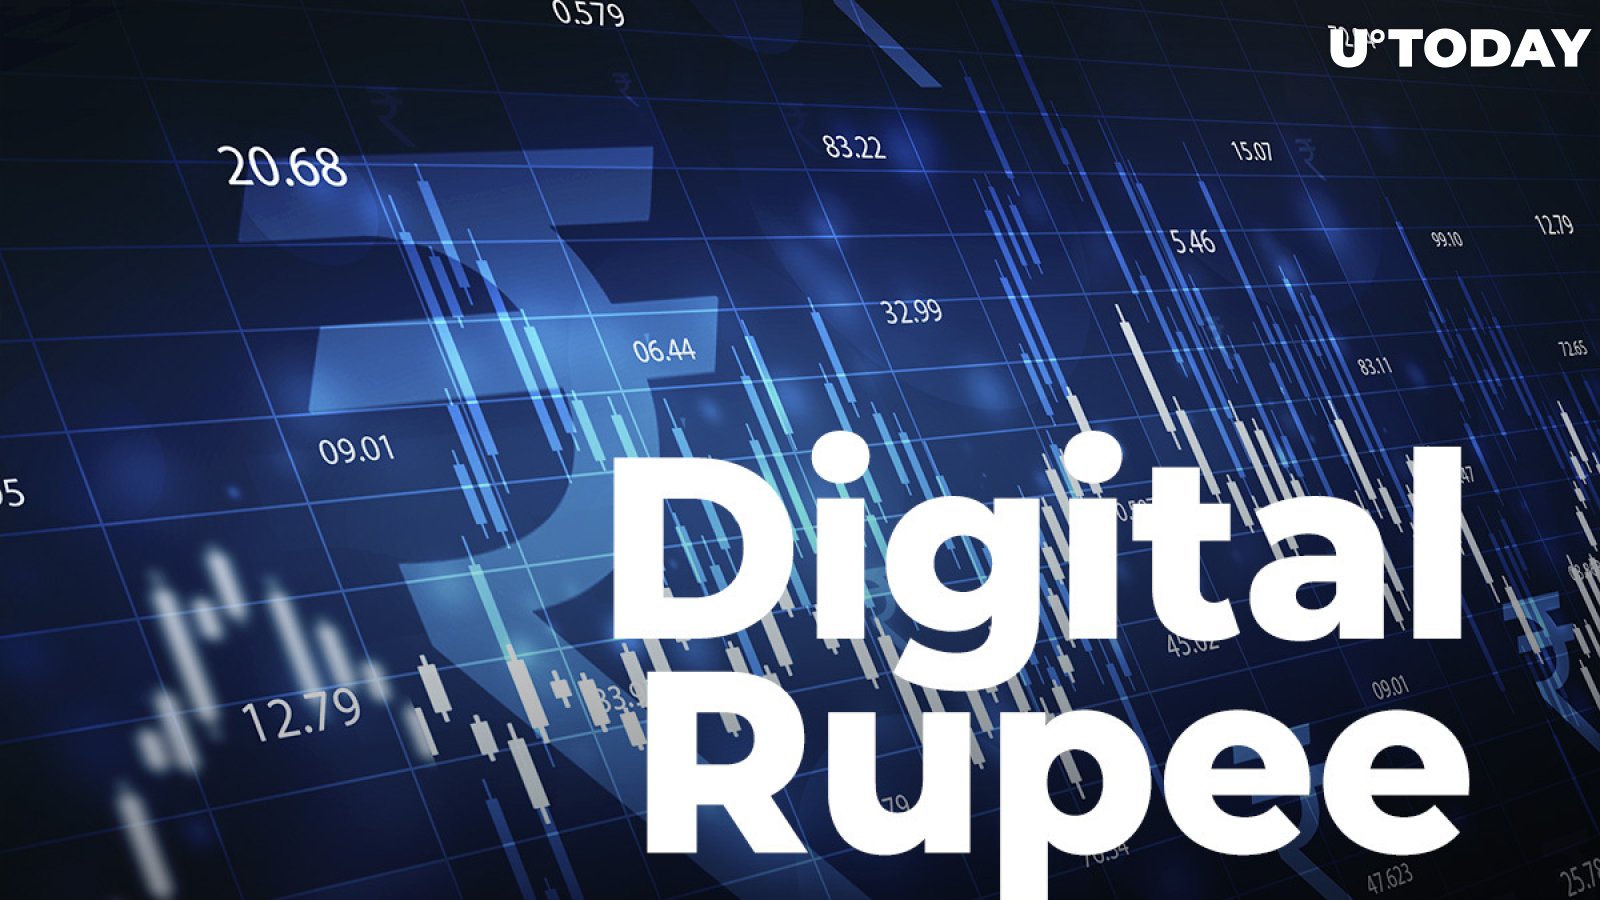 Is Digital Rupee Next? India's Central Bank Exploring Its Own Cryptocurrency